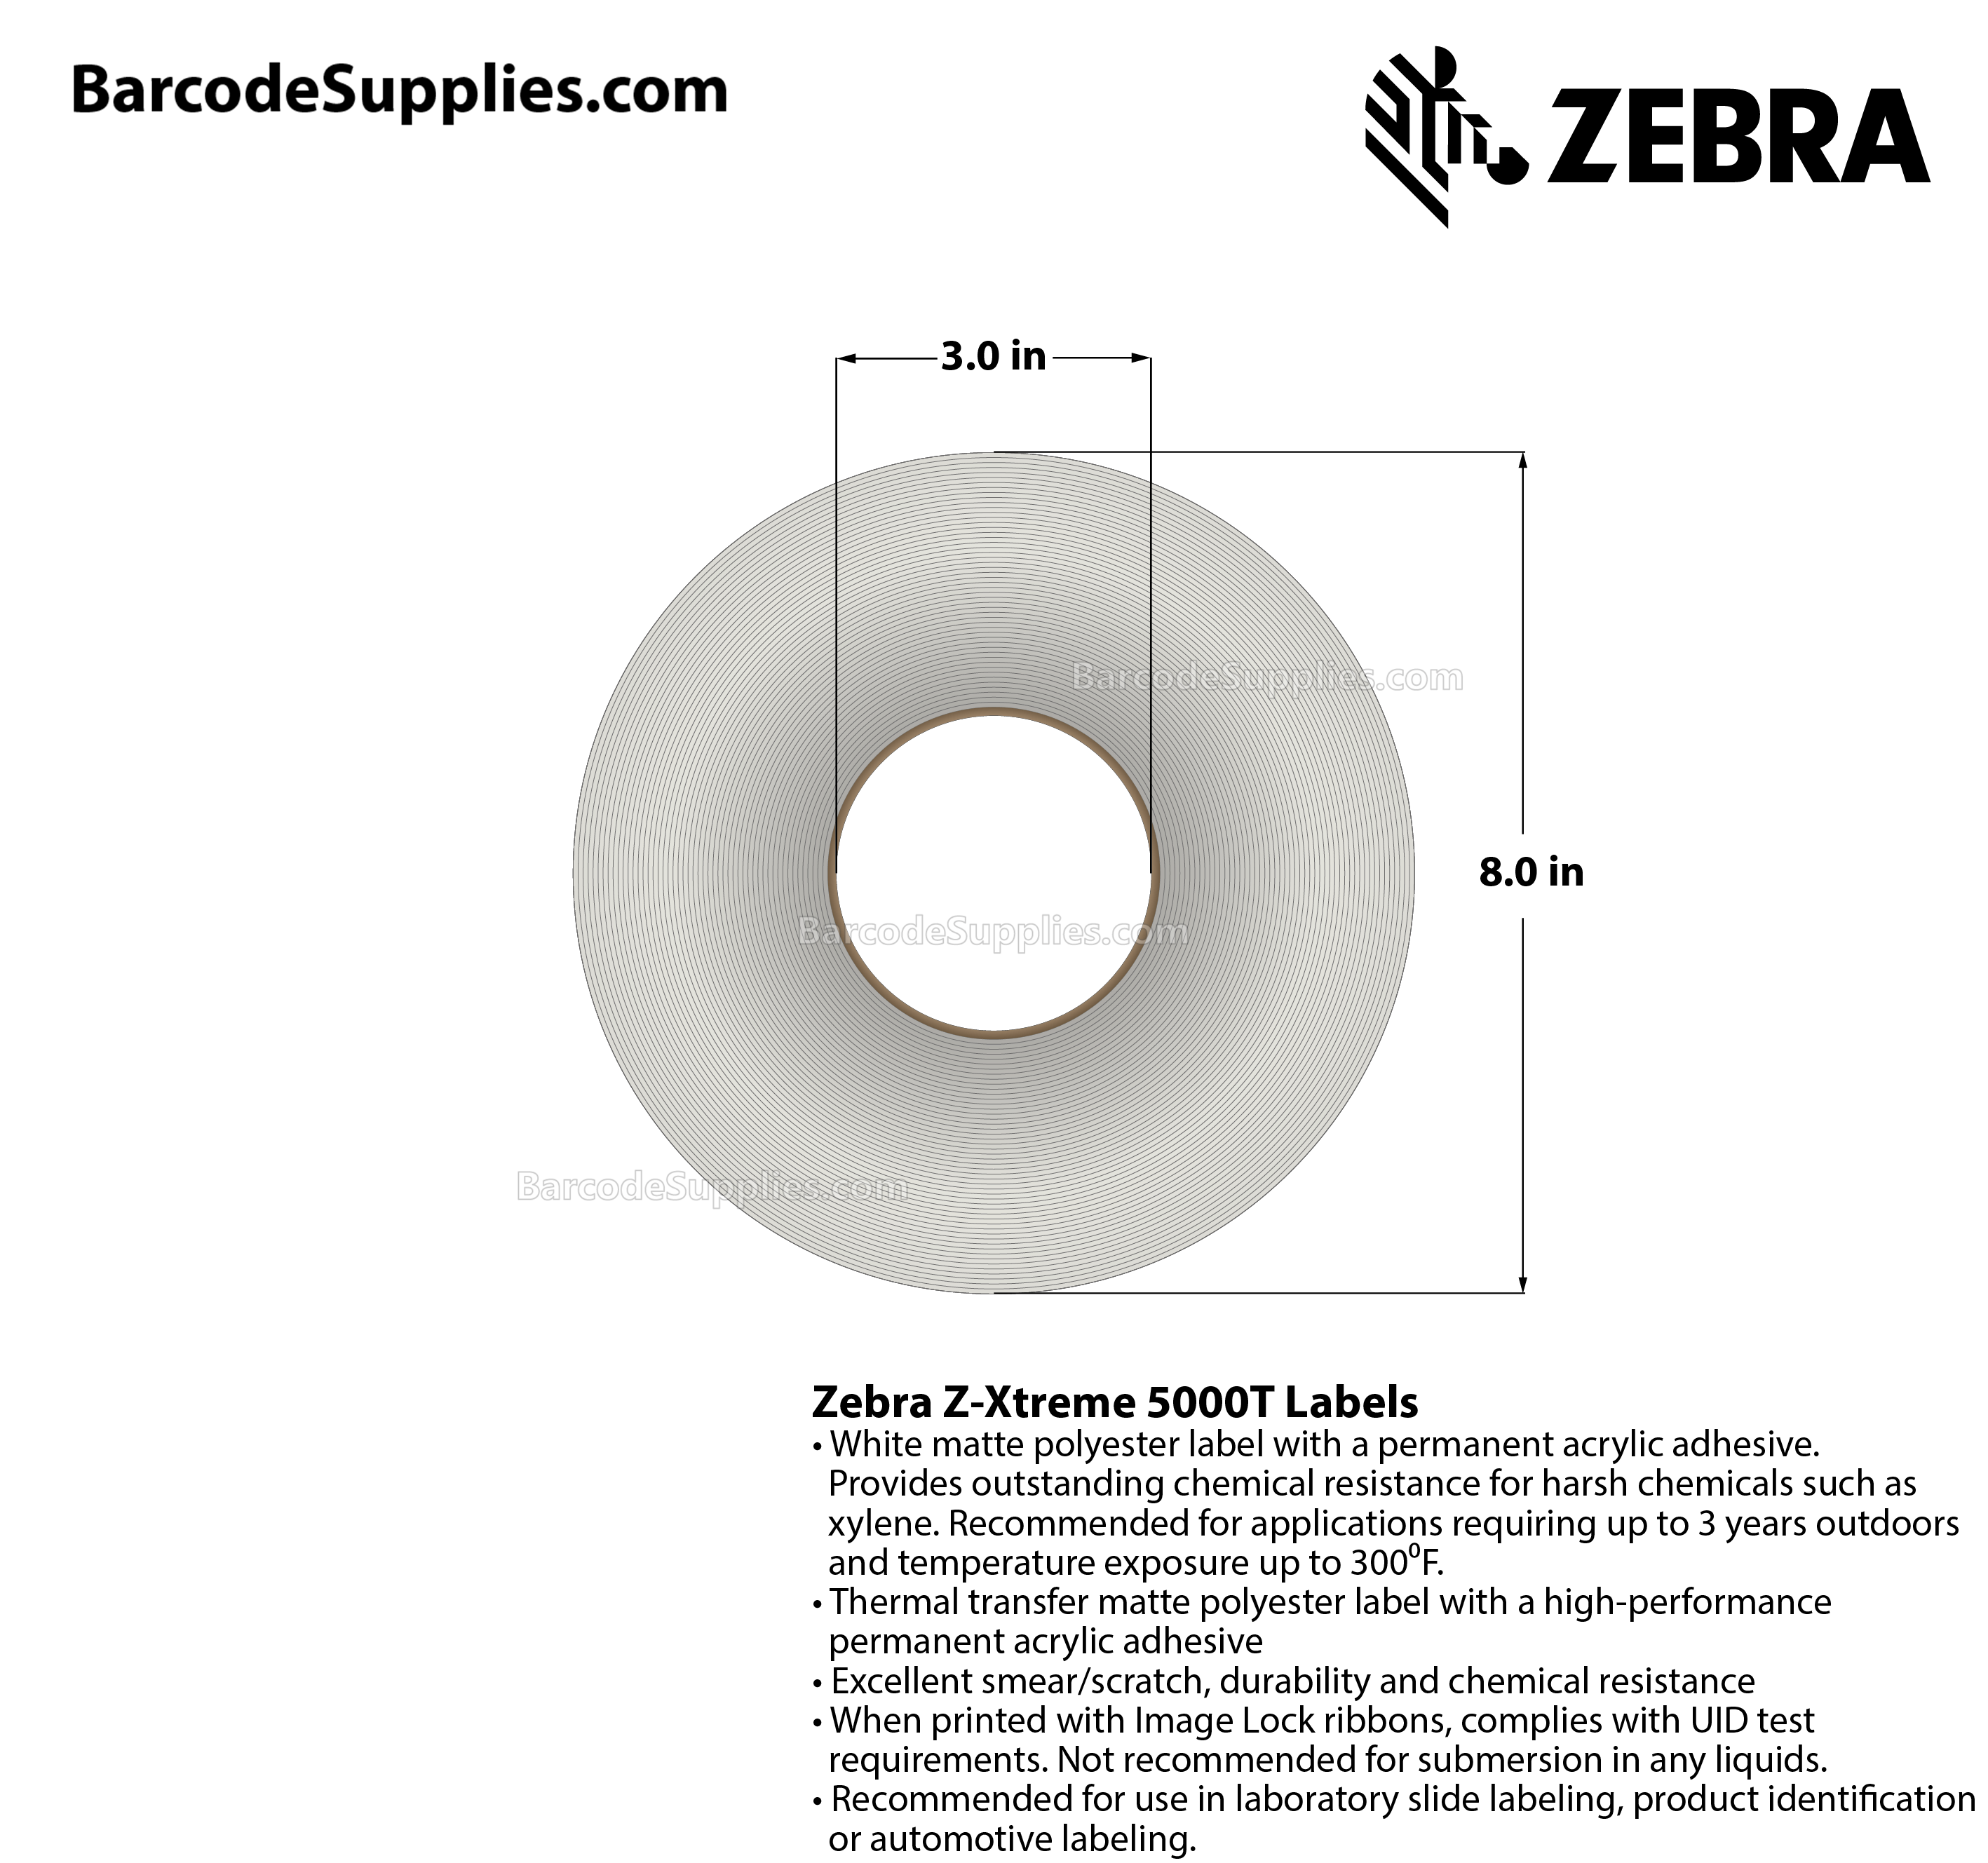 0.9 x 0.375 Thermal Transfer White Z-Xtreme 5000T Labels With Permanent Adhesive - Perforated - 3000 Labels Per Roll - Carton Of 1 Rolls - 3000 Labels Total - MPN: 10023247